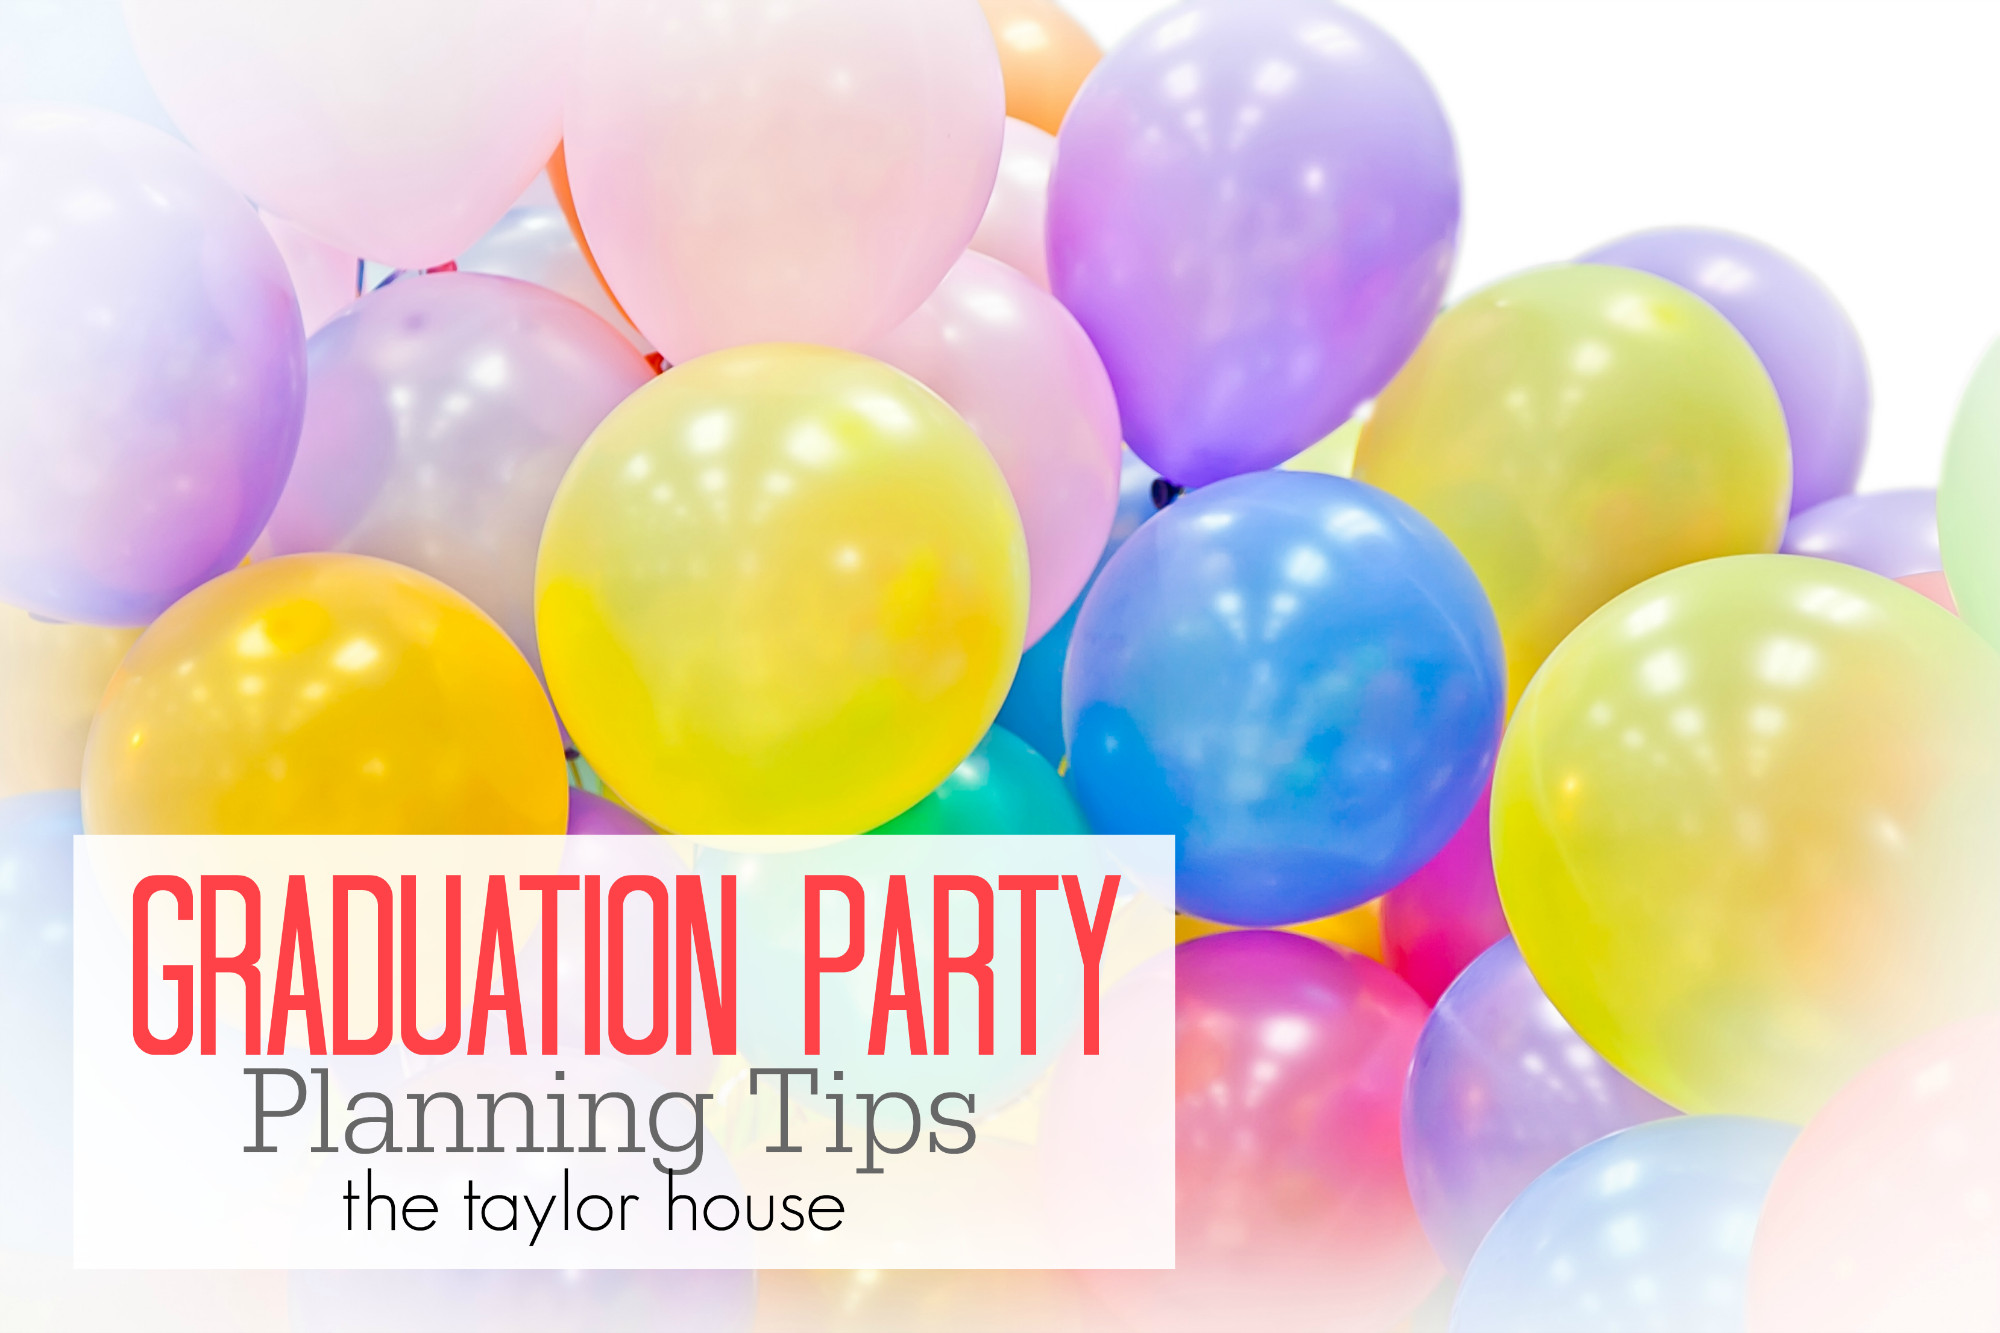 Party Planning Ideas For Graduation
 Graduation Party Planning Tips